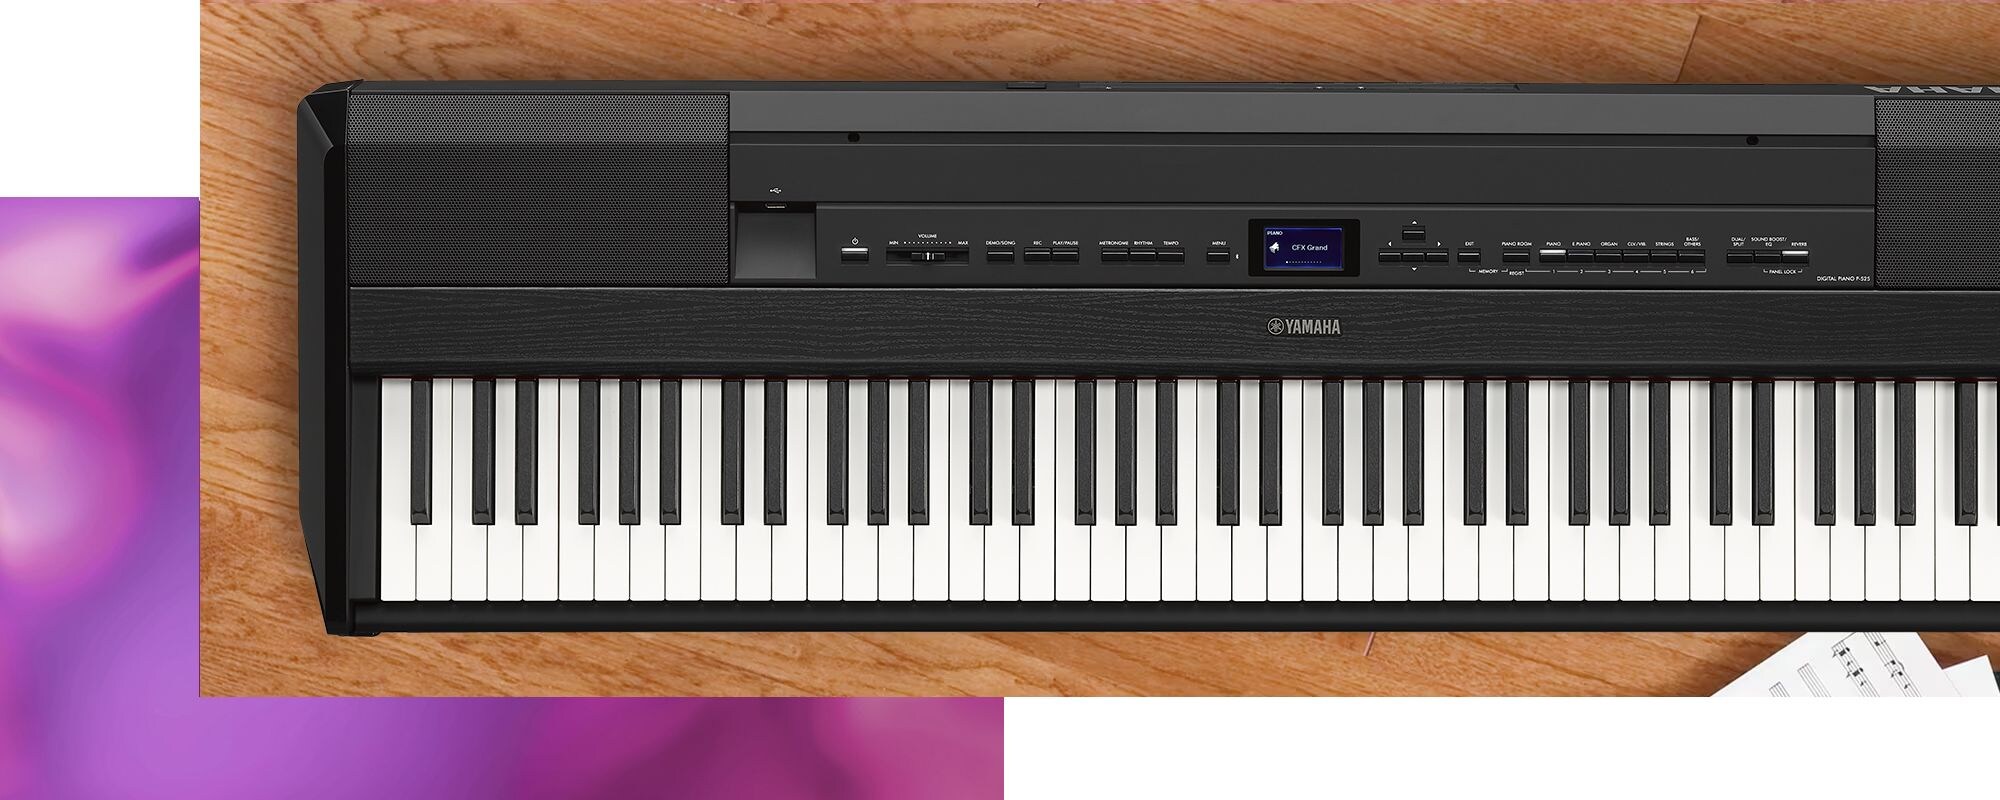 East P / Yamaha Instruments Asia - Series - - / - / Oceania Products - Musical CIS America / Pianos Latin Middle Africa /